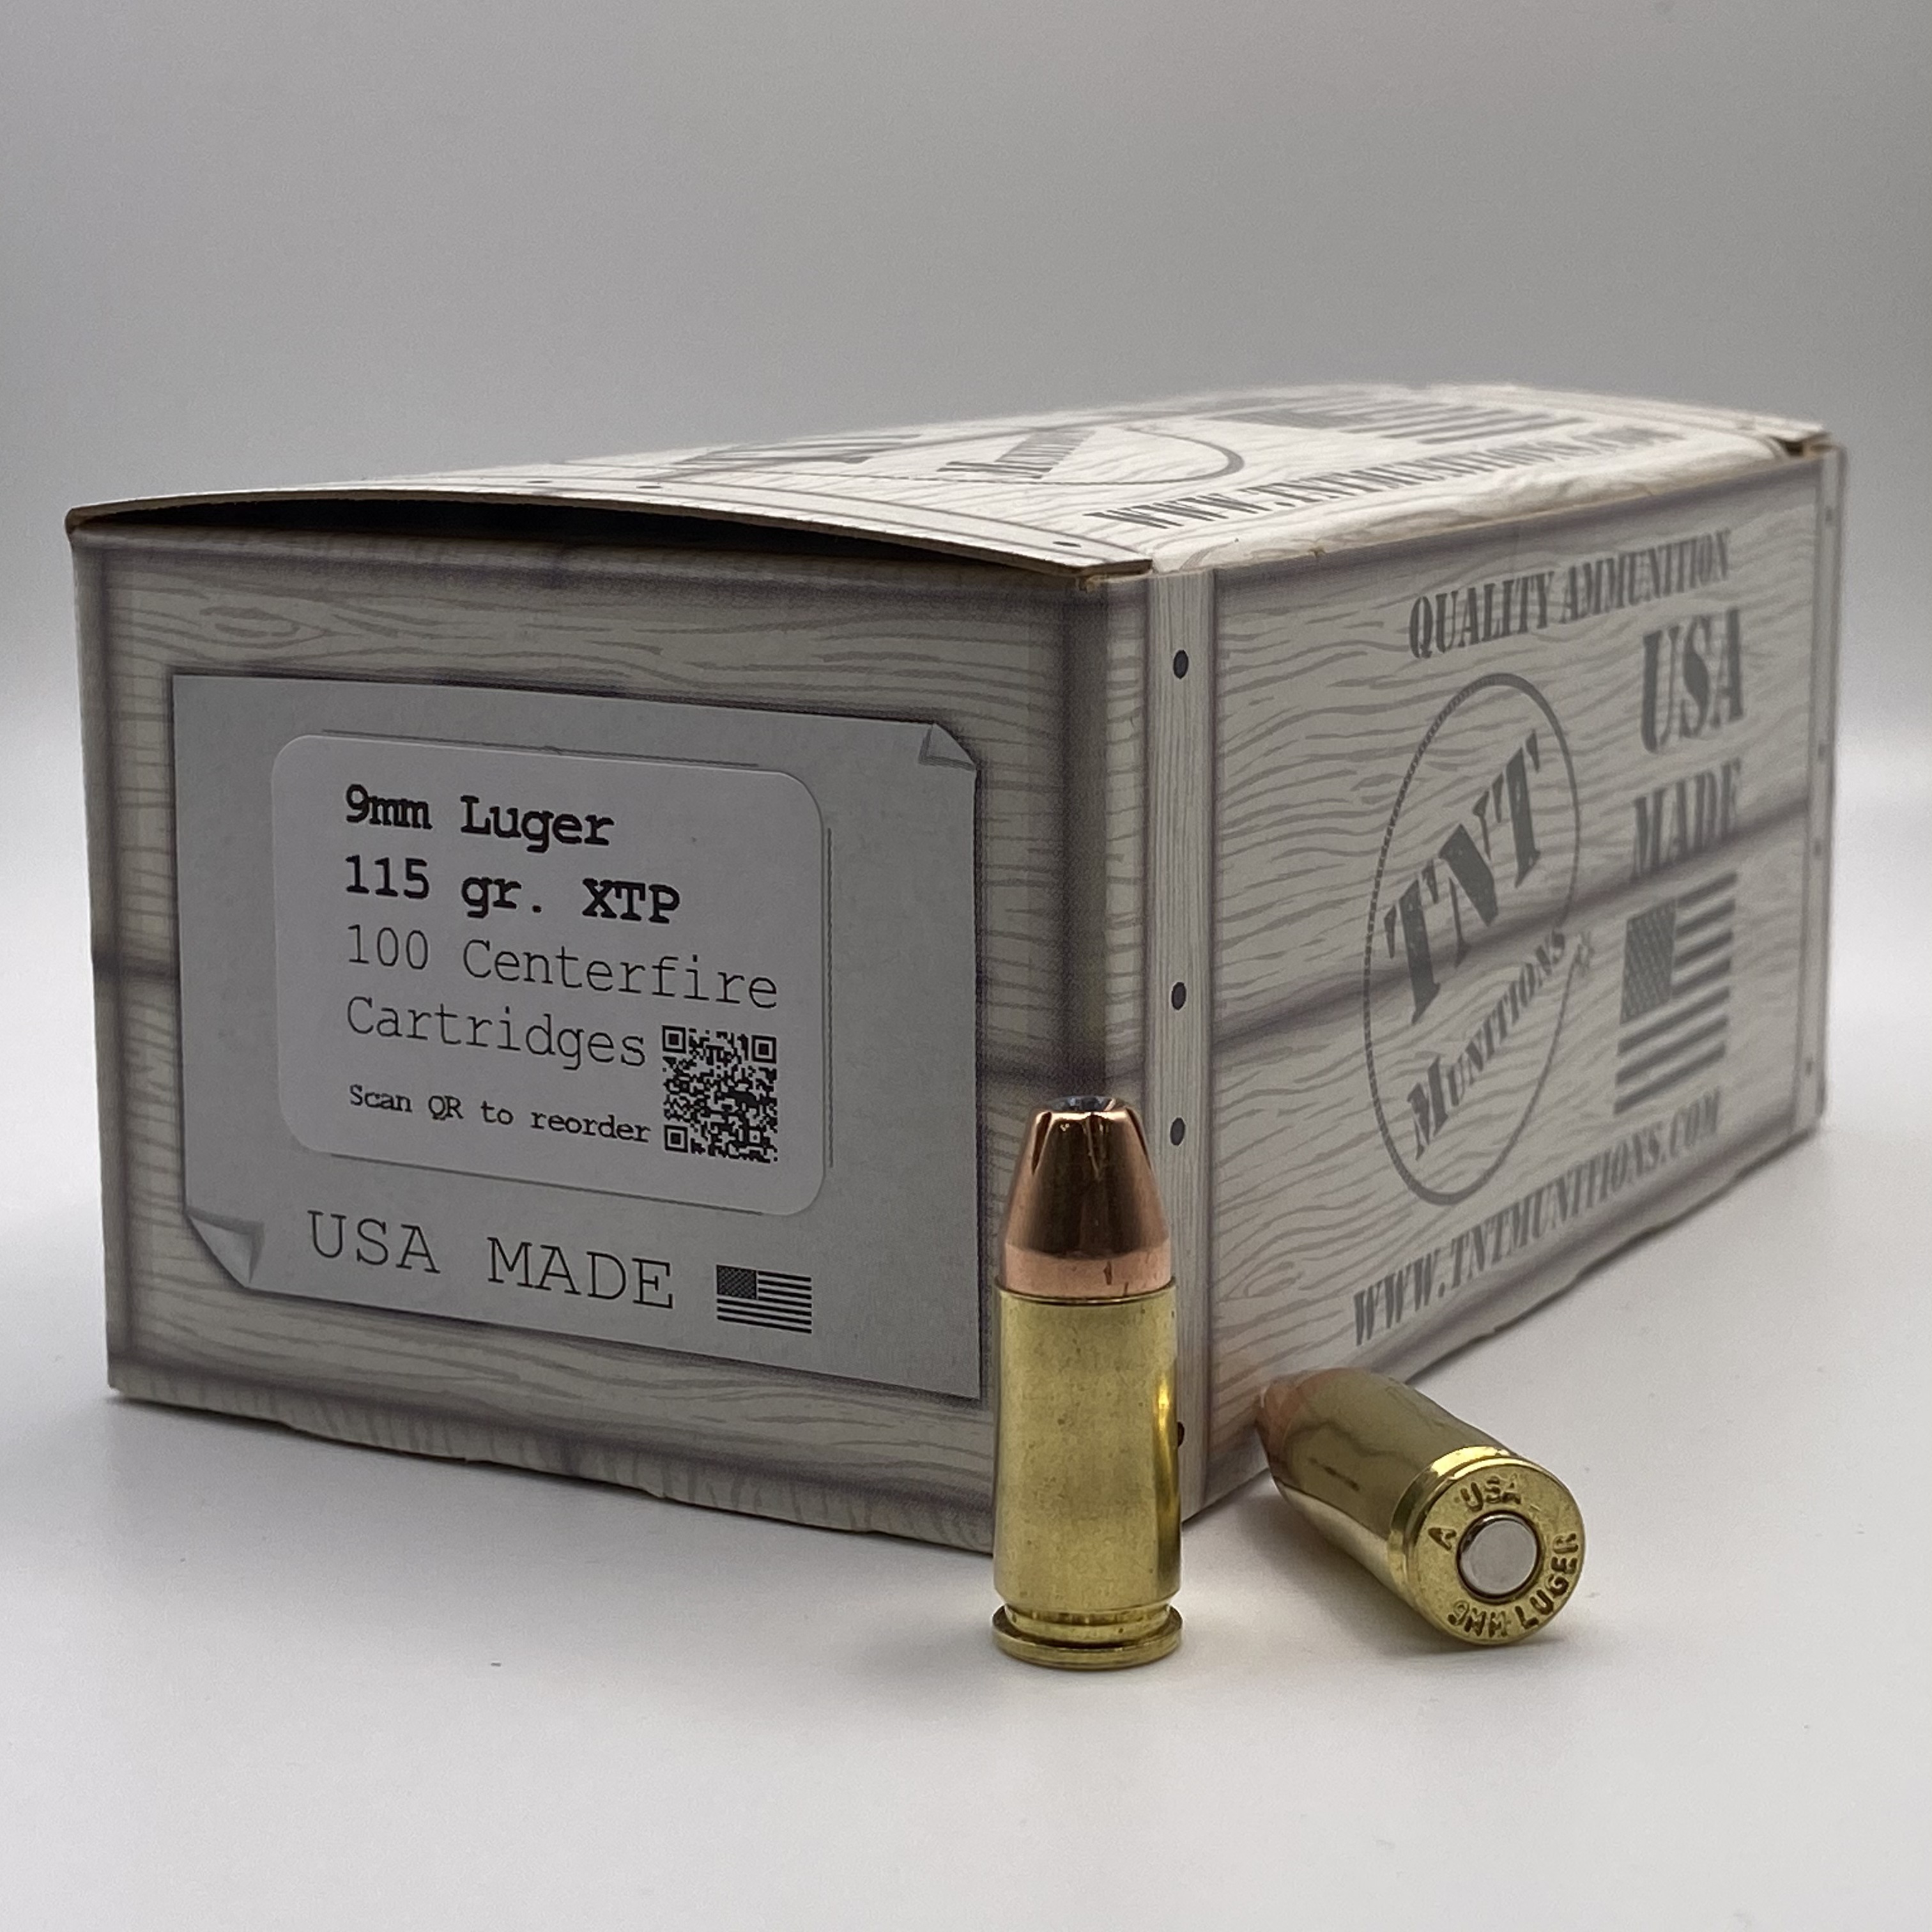 9mm Luger 115 gr. XTP Defense. MEMORIAL DAY SALE! THROUGH MAY 29TH ONLY - SHIPS NBD